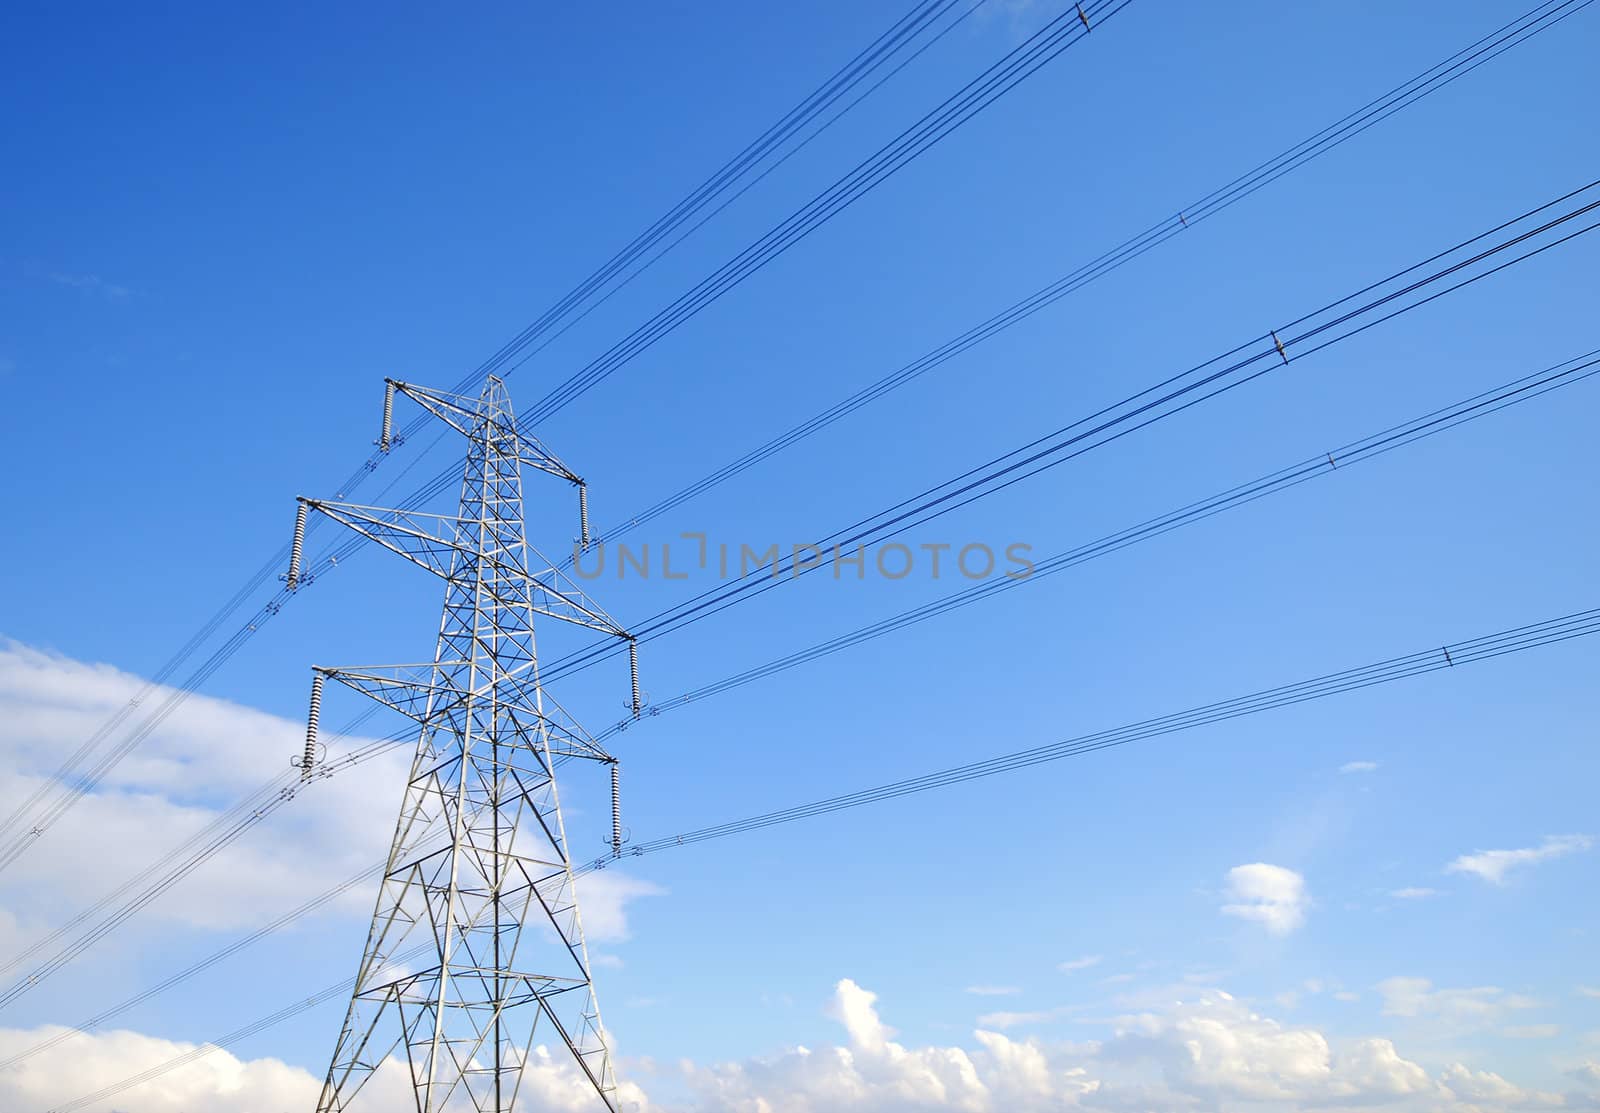 View of electricity pylon and power lines